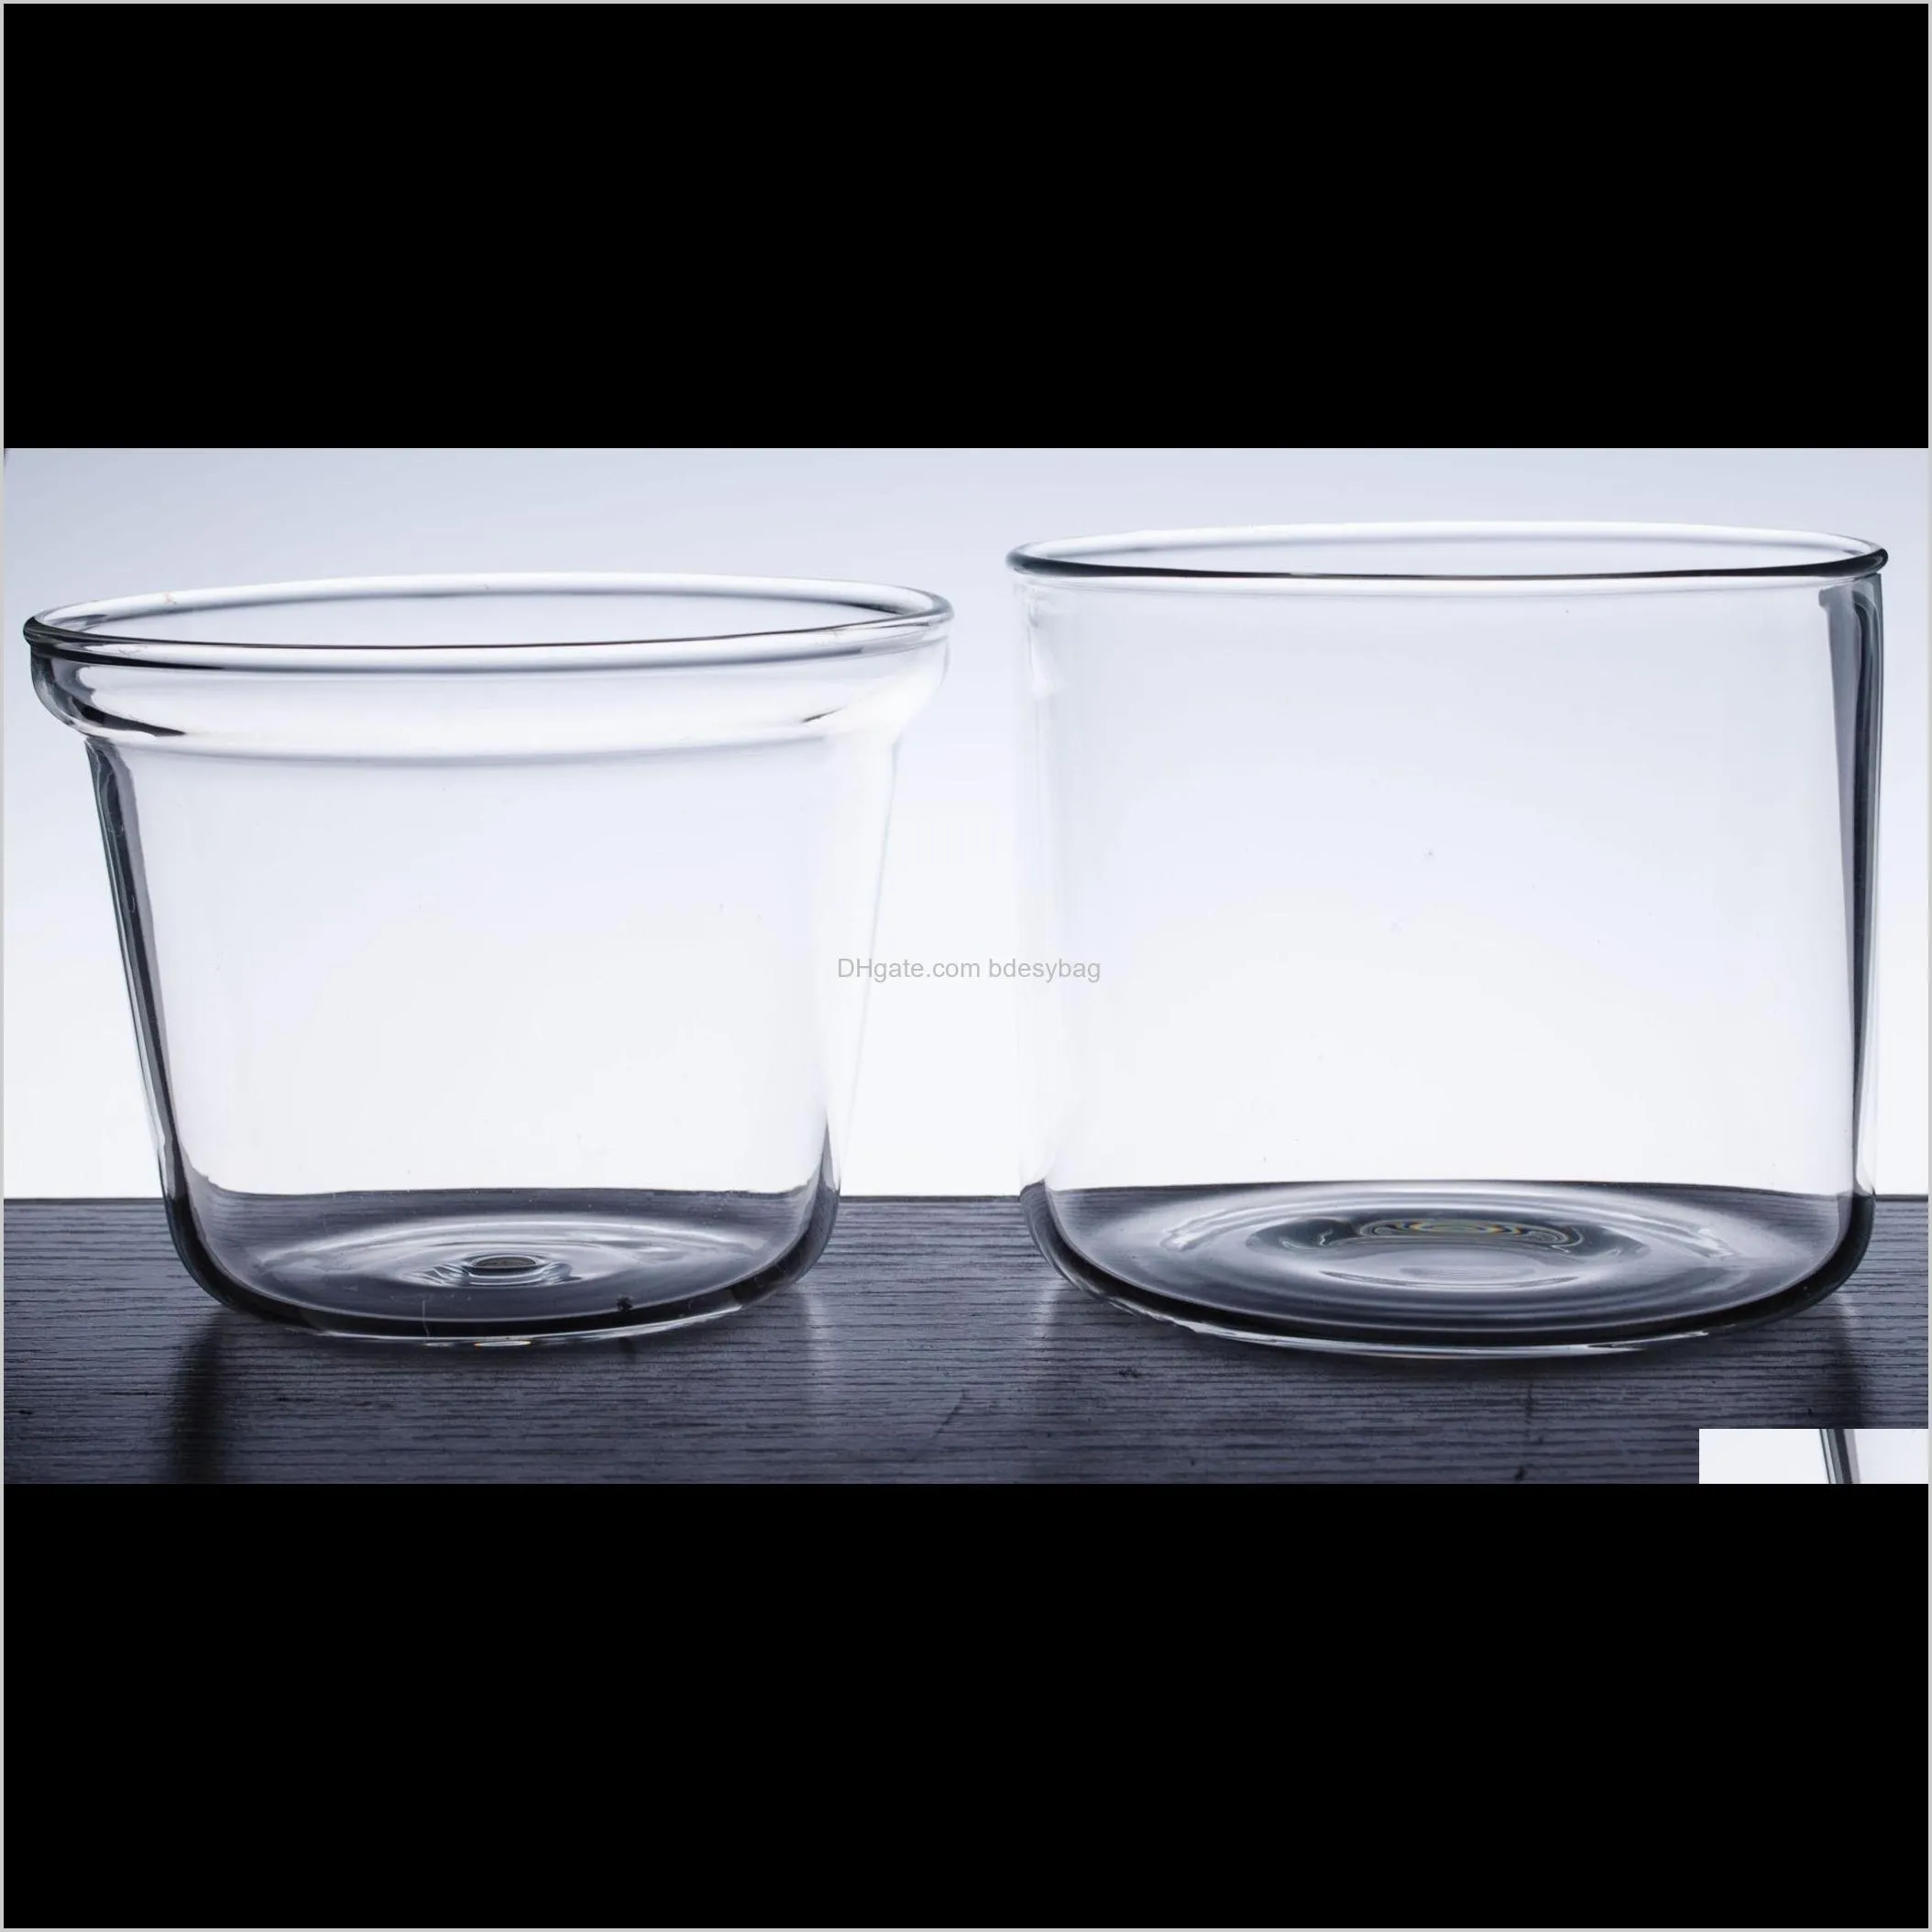 1x 400ml clear glass bowl garden planter vase flower pot with glass infuser home modern pot for green plant